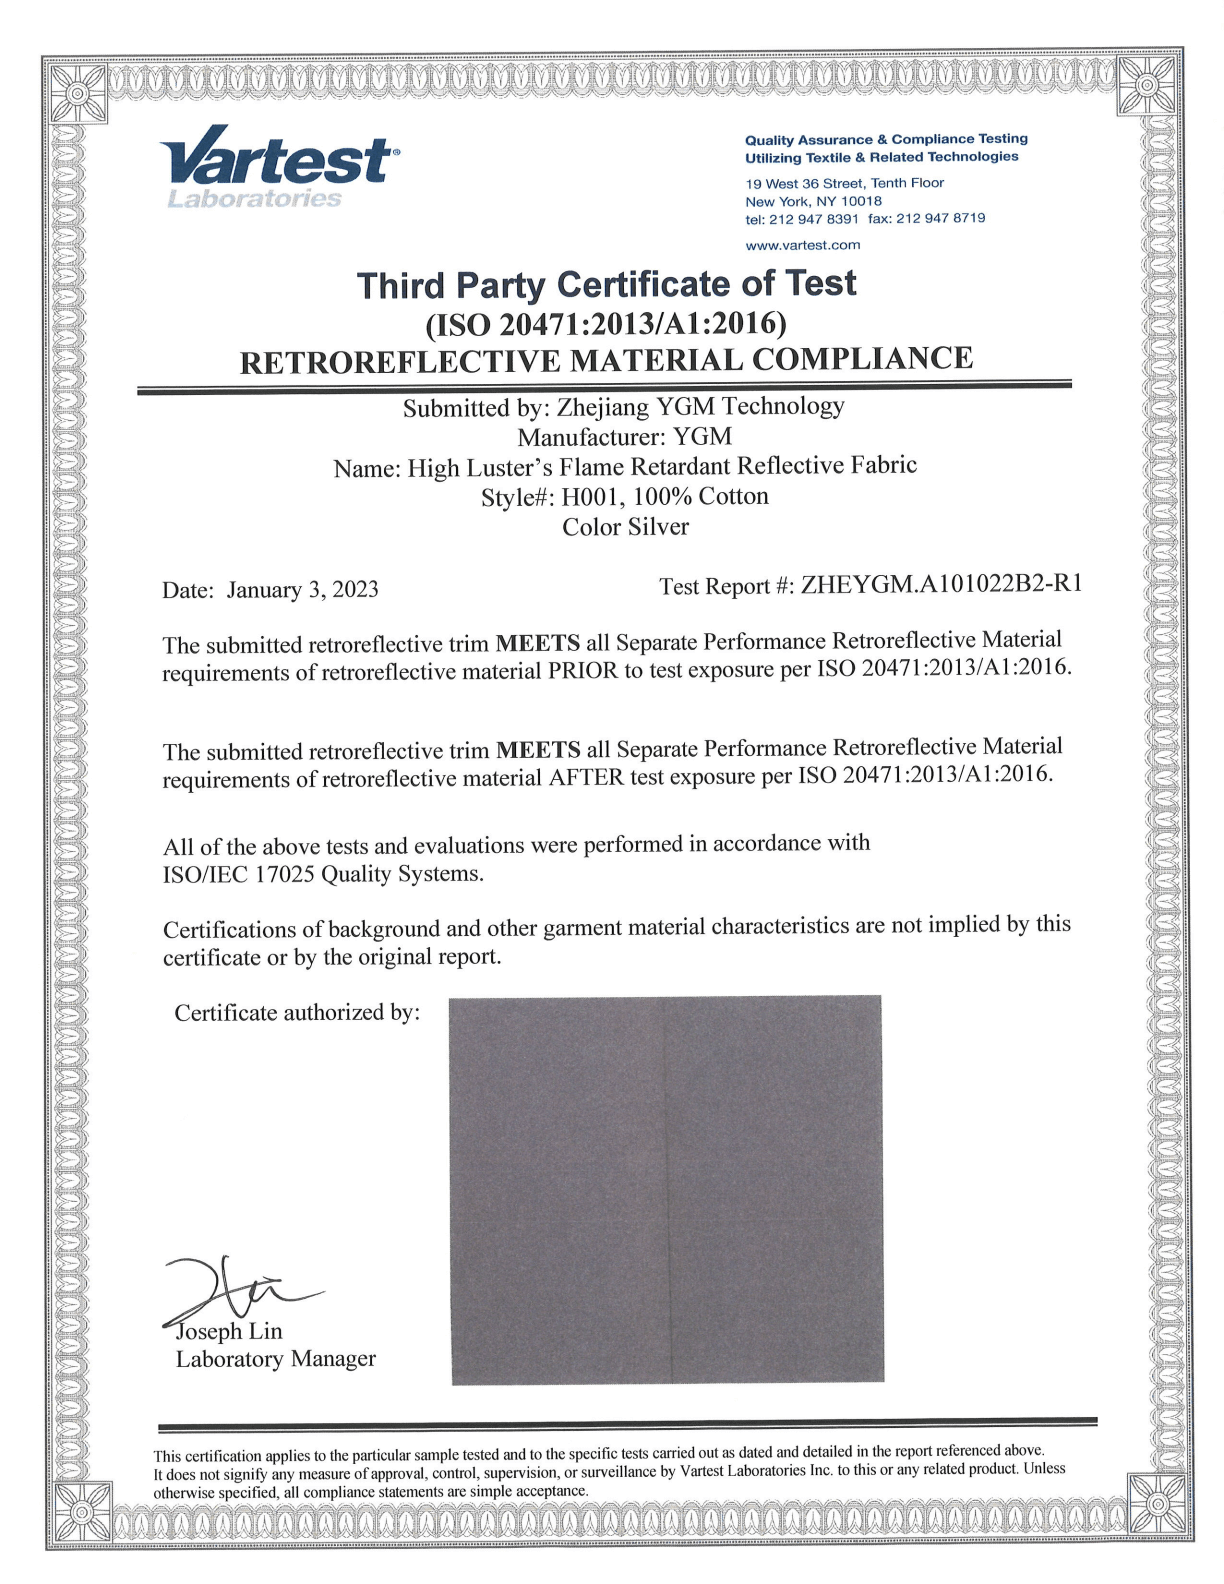 EN ISO 20471:2013 Certificate & Test Report for Silver Flame Retardant Reflective Tape (H001 Product) —— Updated in Jan. 2023